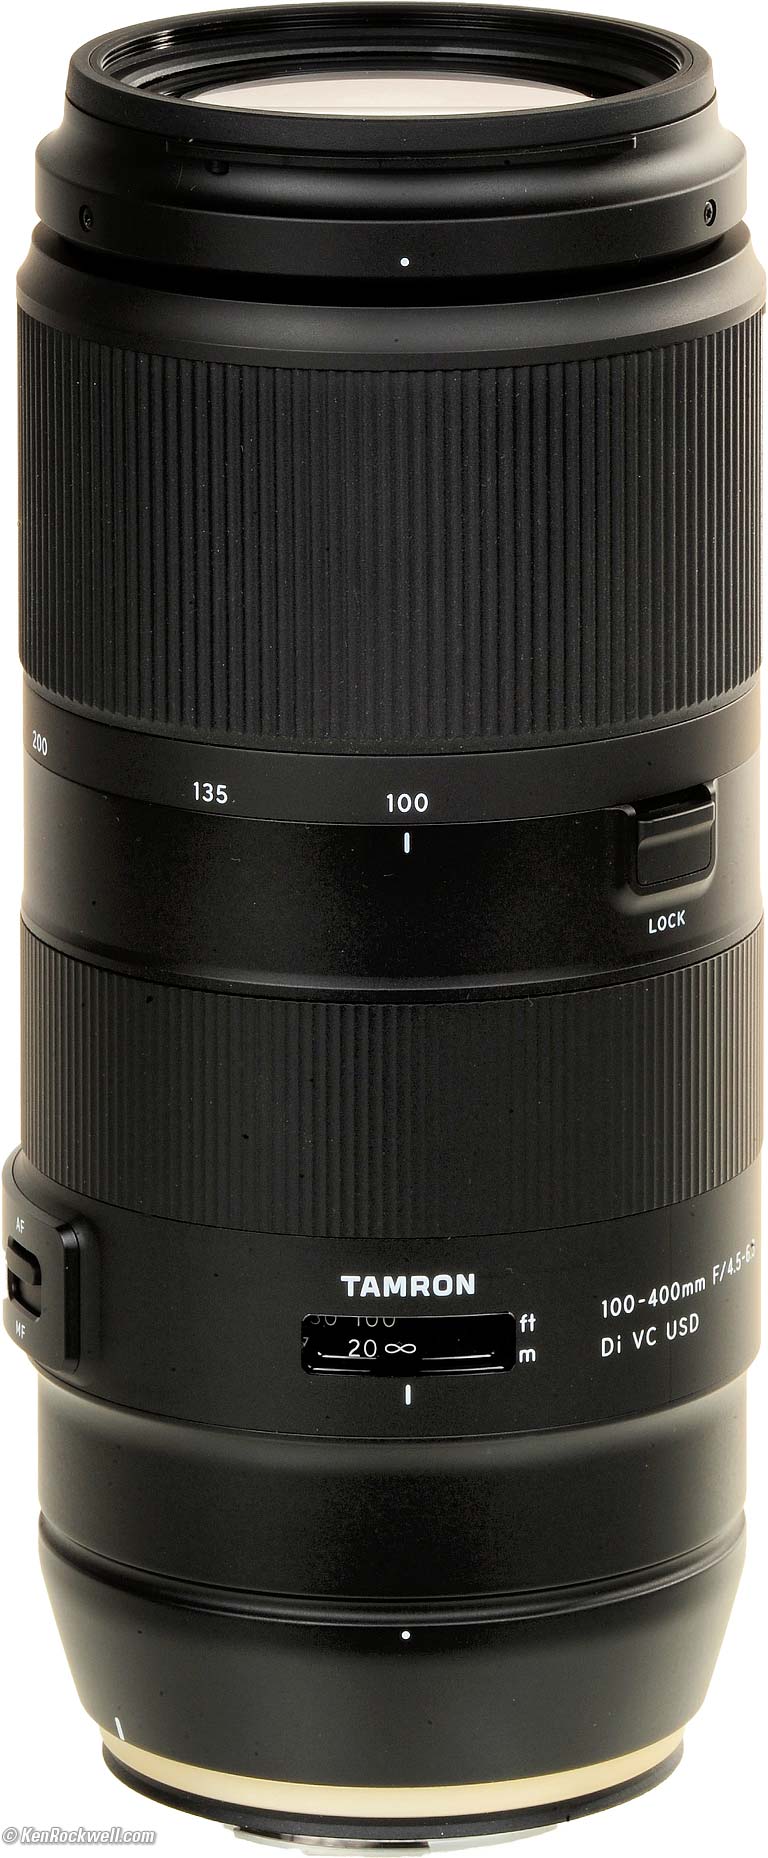 The Tamron 70-300mm f/4.5-6.3 vs Sony 70-300mm f/4.5-5.6 G OSS : Review &  Comparison - Light And Matter